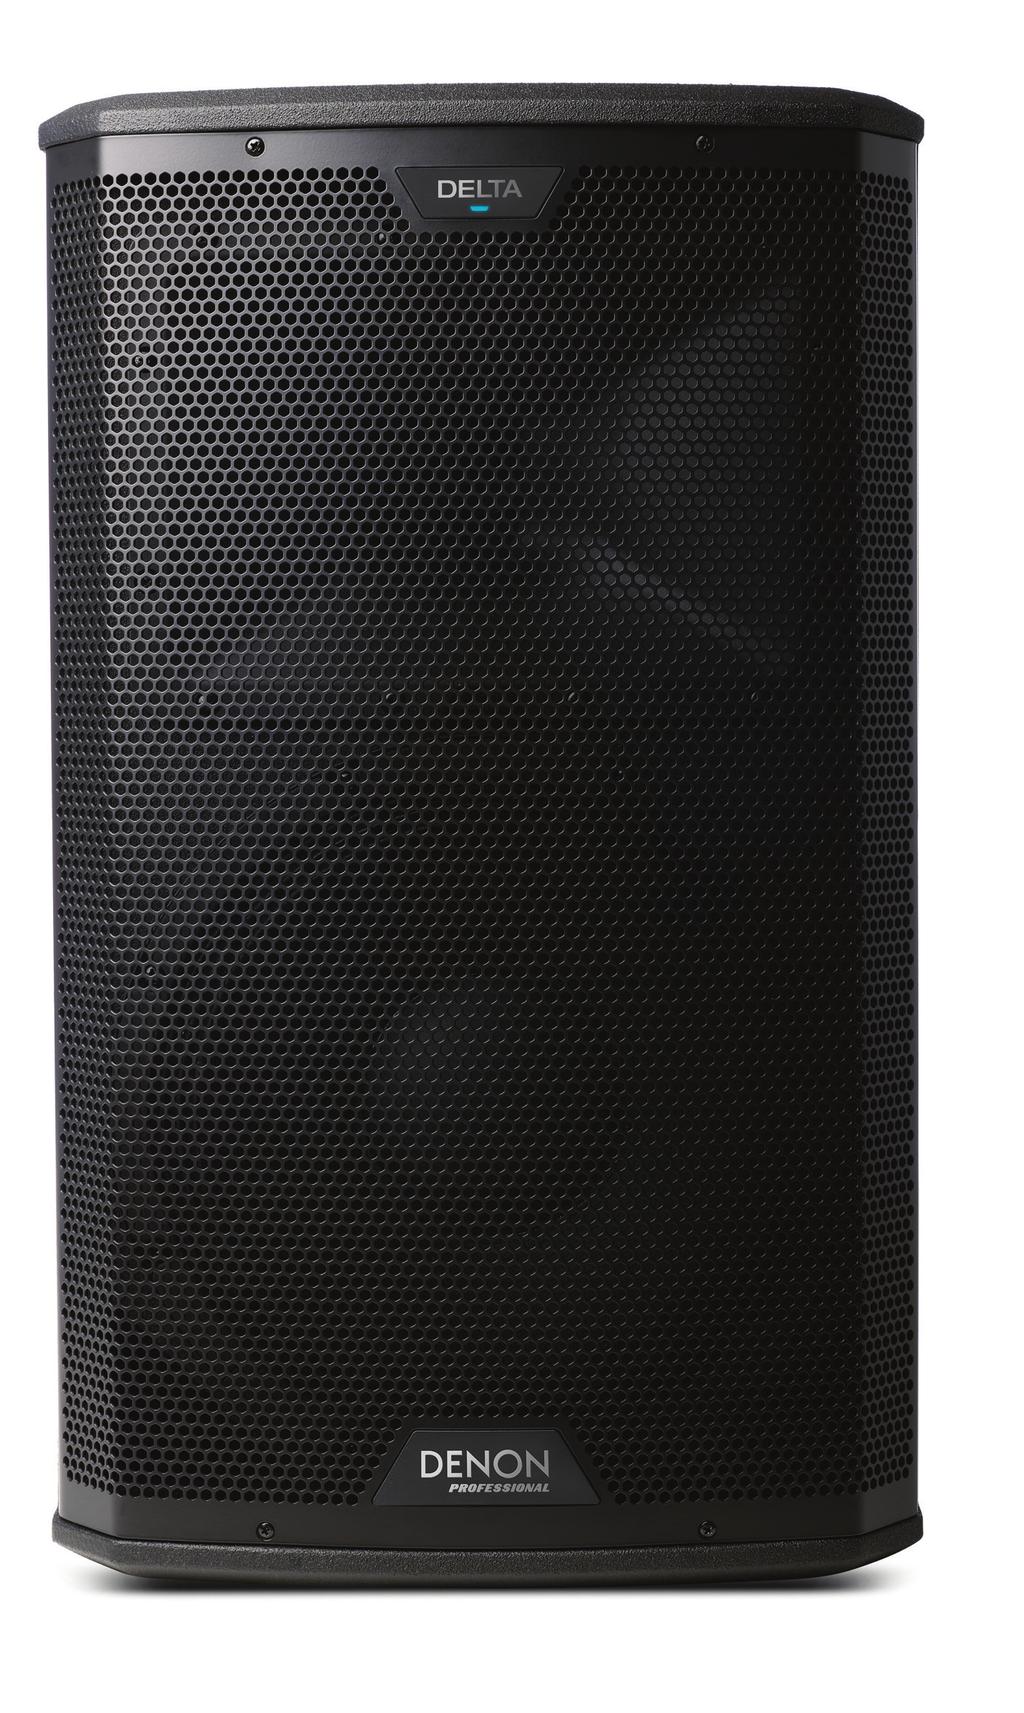 12-INCH 2-WAY 2-WATT LOUDSPEAKER WITH WIRELESS CONNECTIVITY For situations that demand the ultimate in speaker performance, Denon Professional proudly offers the Delta Series a family of powered